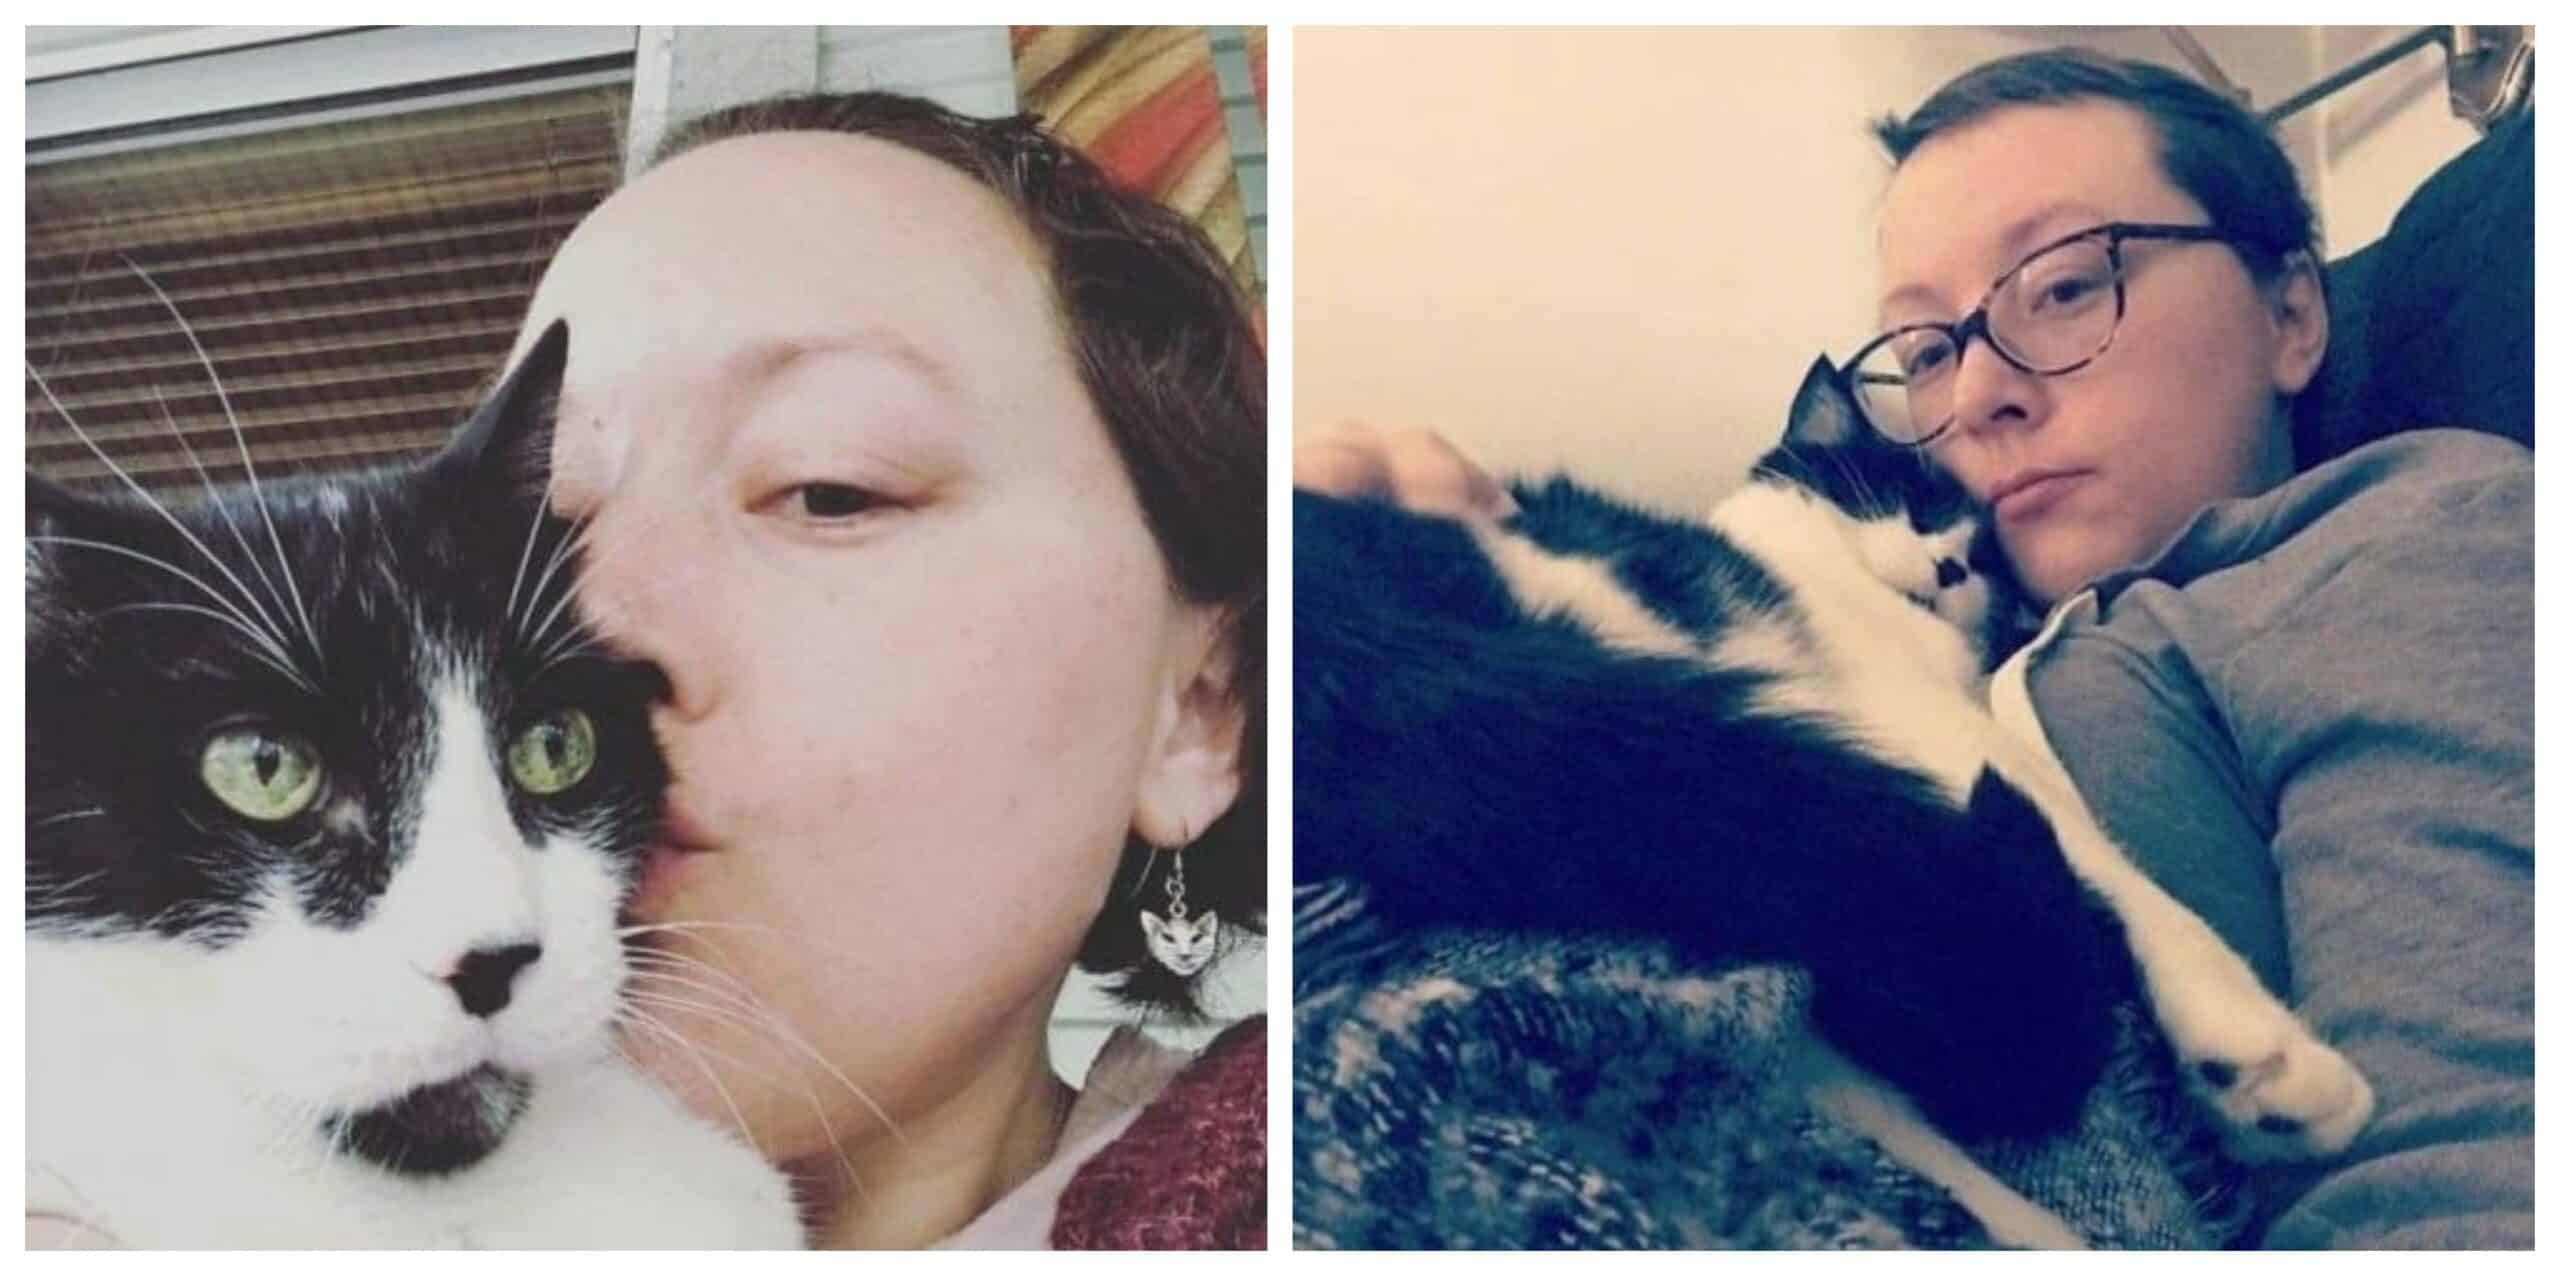 Until she receives surgery, a cat saves a woman’s life by remaining on her left side of the chest